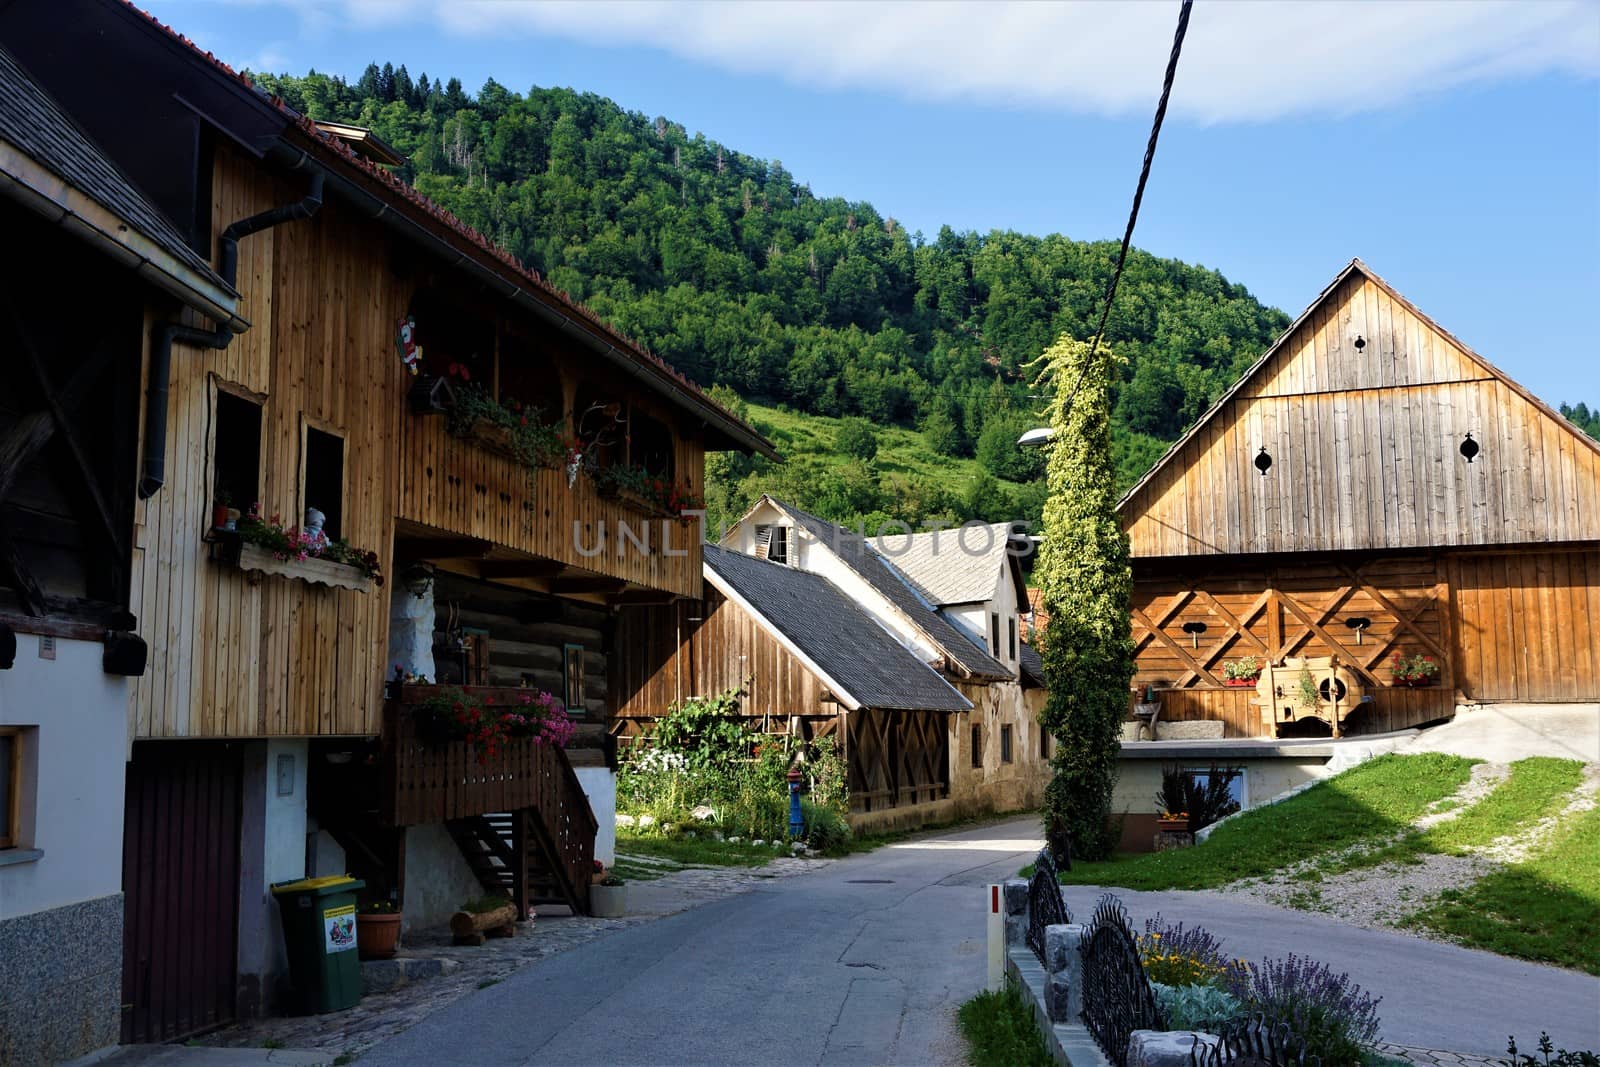 A few wooden houses in Zasip near Bled by pisces2386